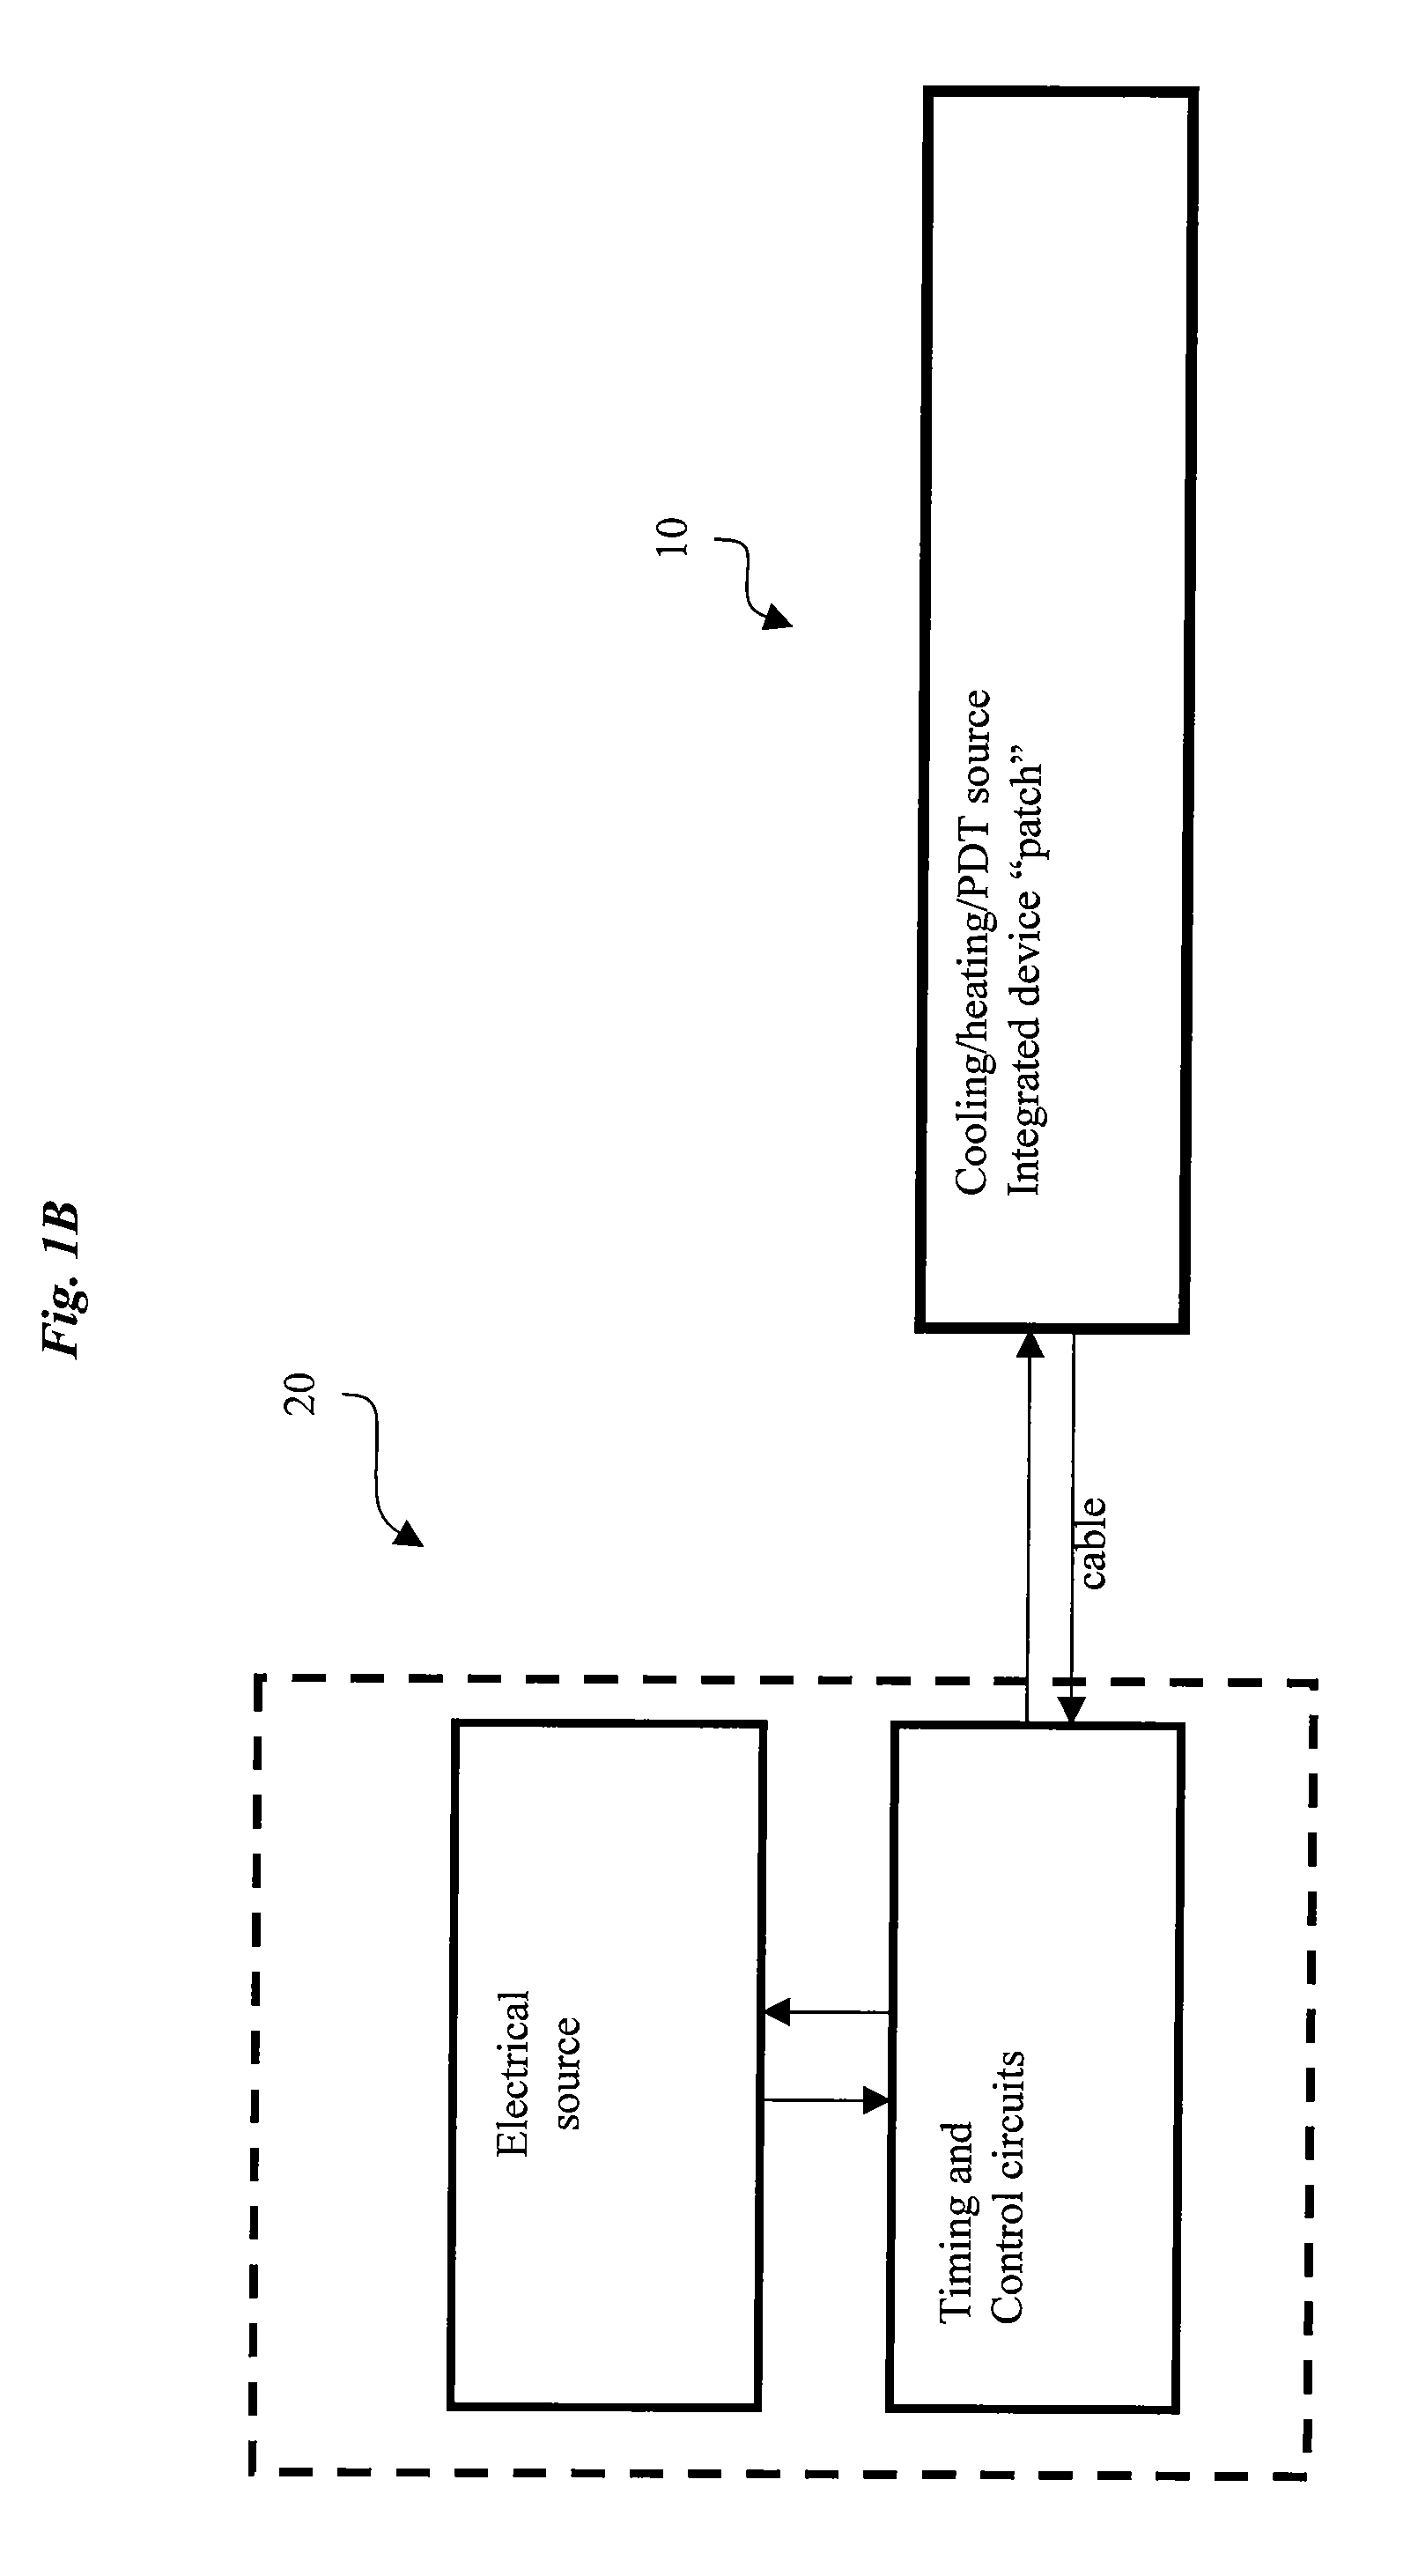 Methods and devices for epithelial protection during photodynamic therapy